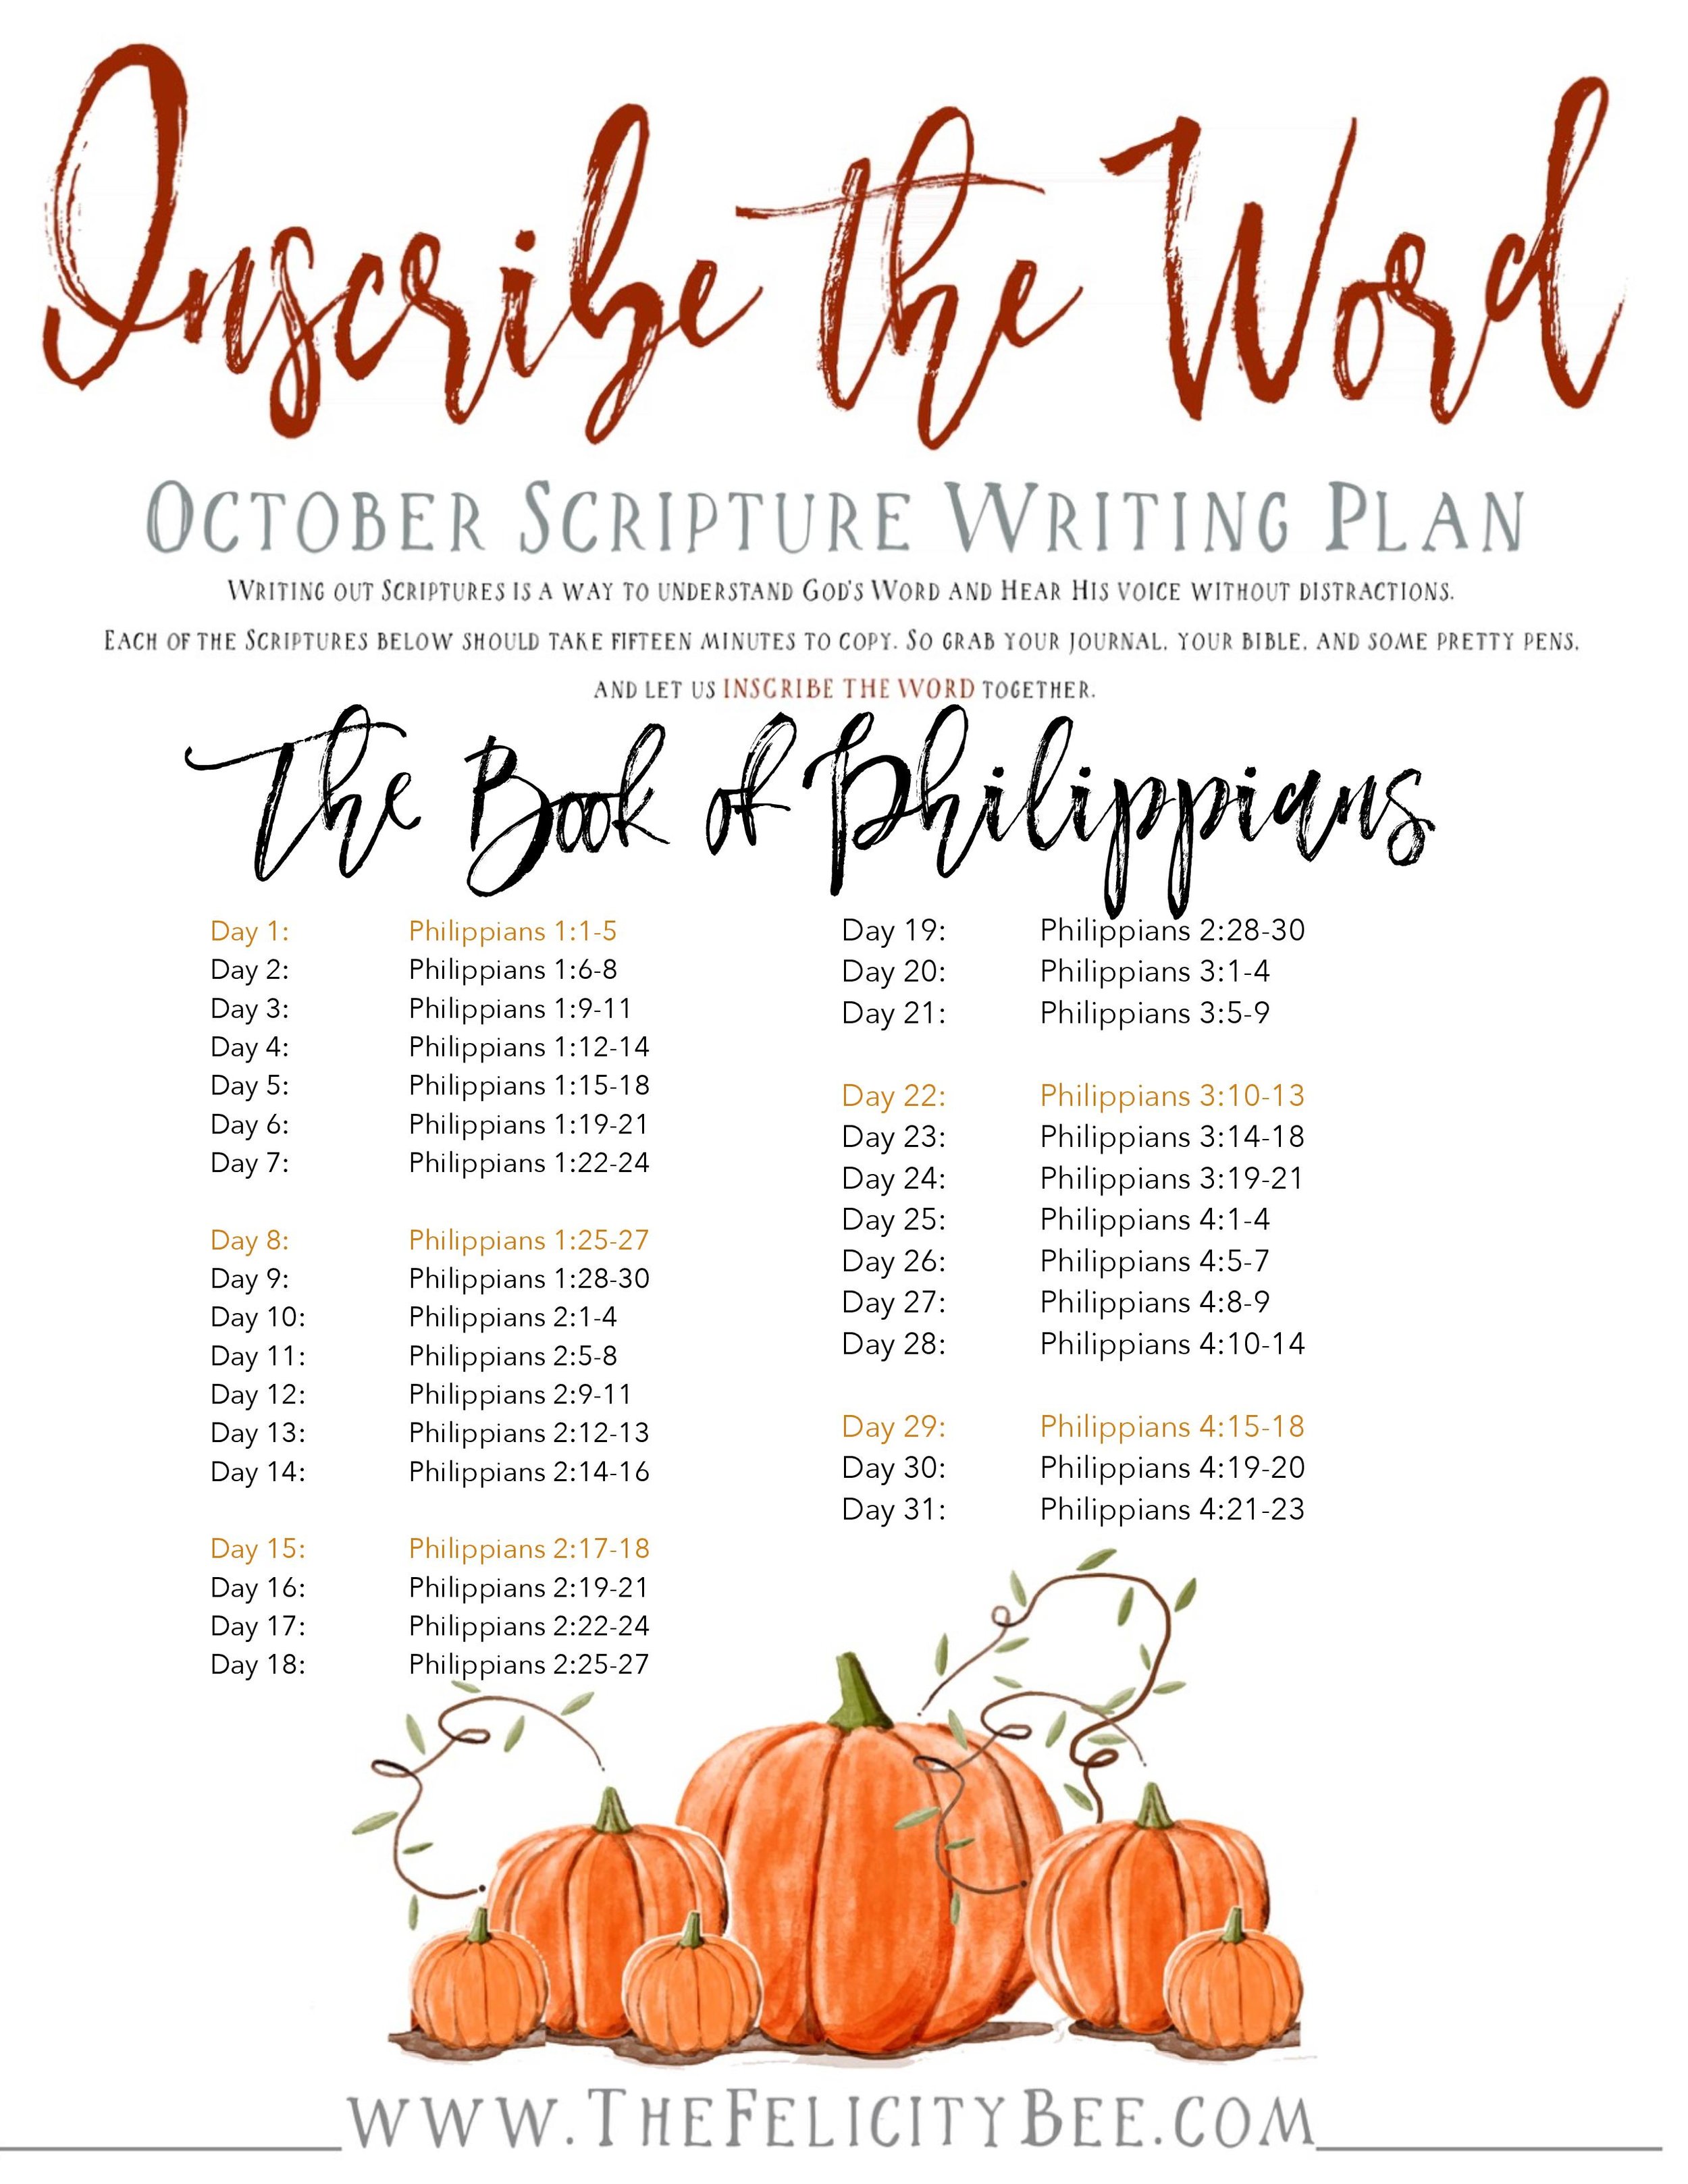 Inscribe the Word . . . October Scripture Writing Plan — Symphony of Praise